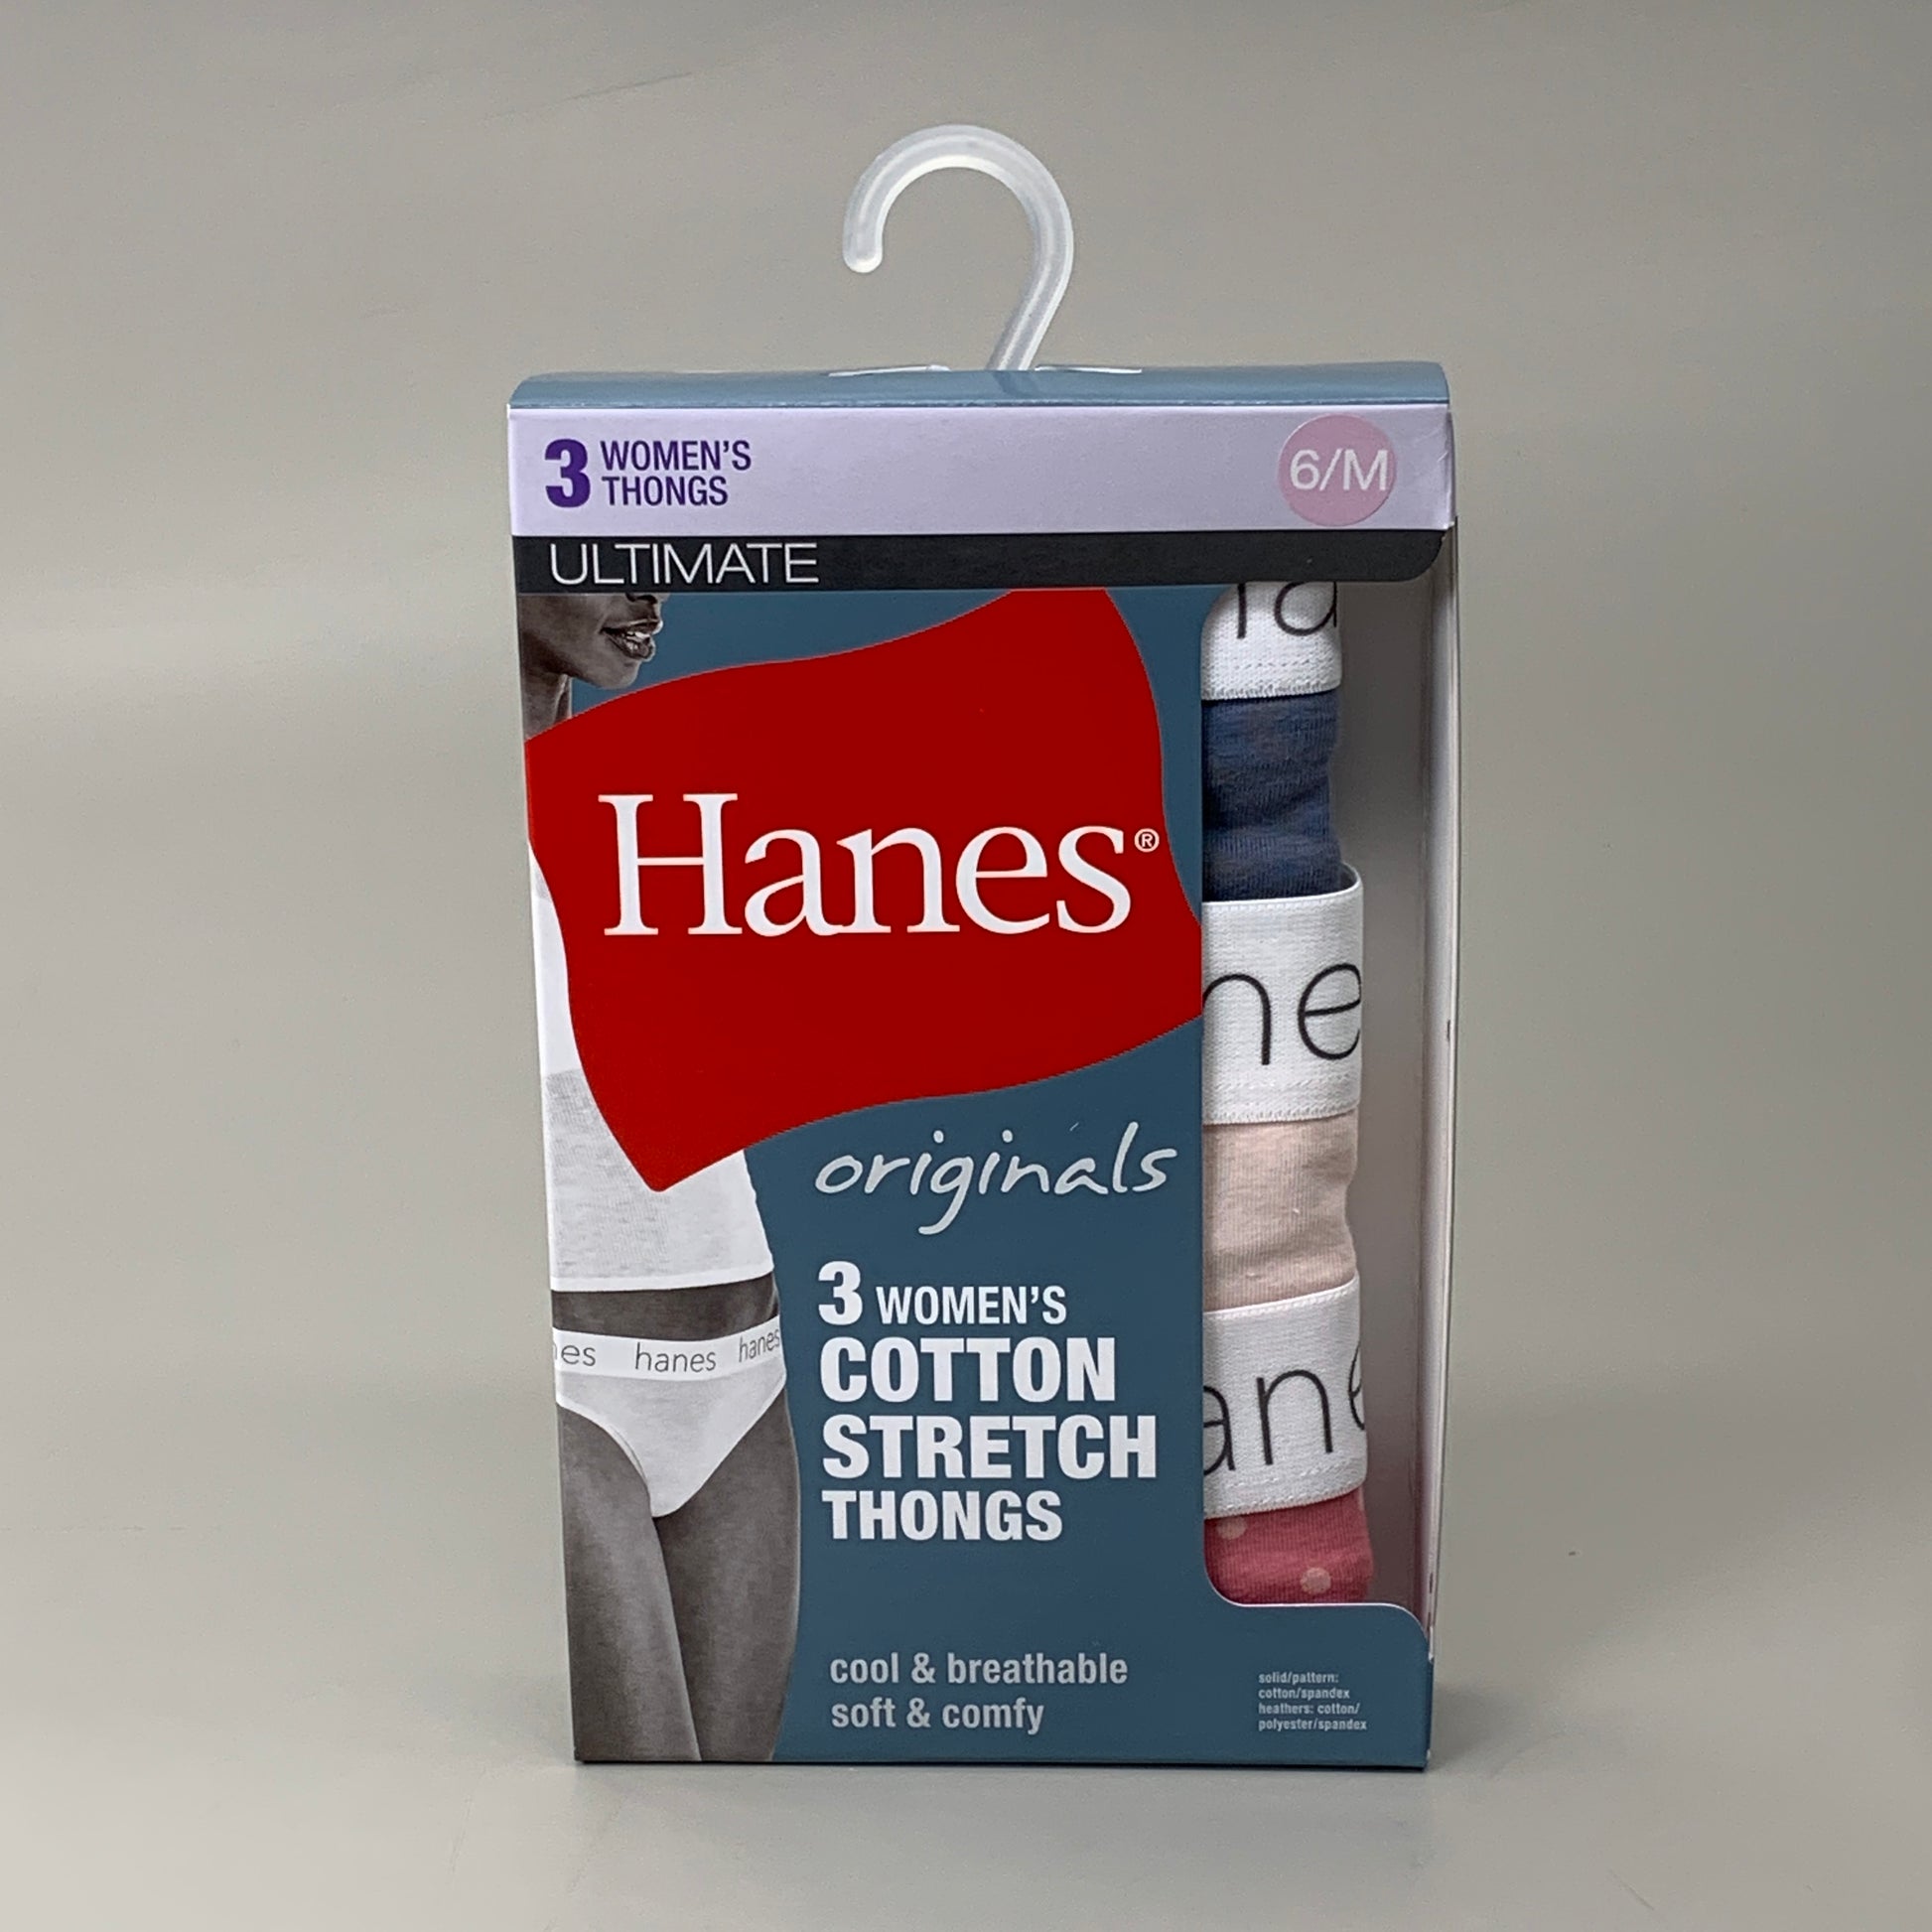 HANES 3 PACK!! Originals Women's Breathable Cotton Stretch Thongs Unde –  PayWut